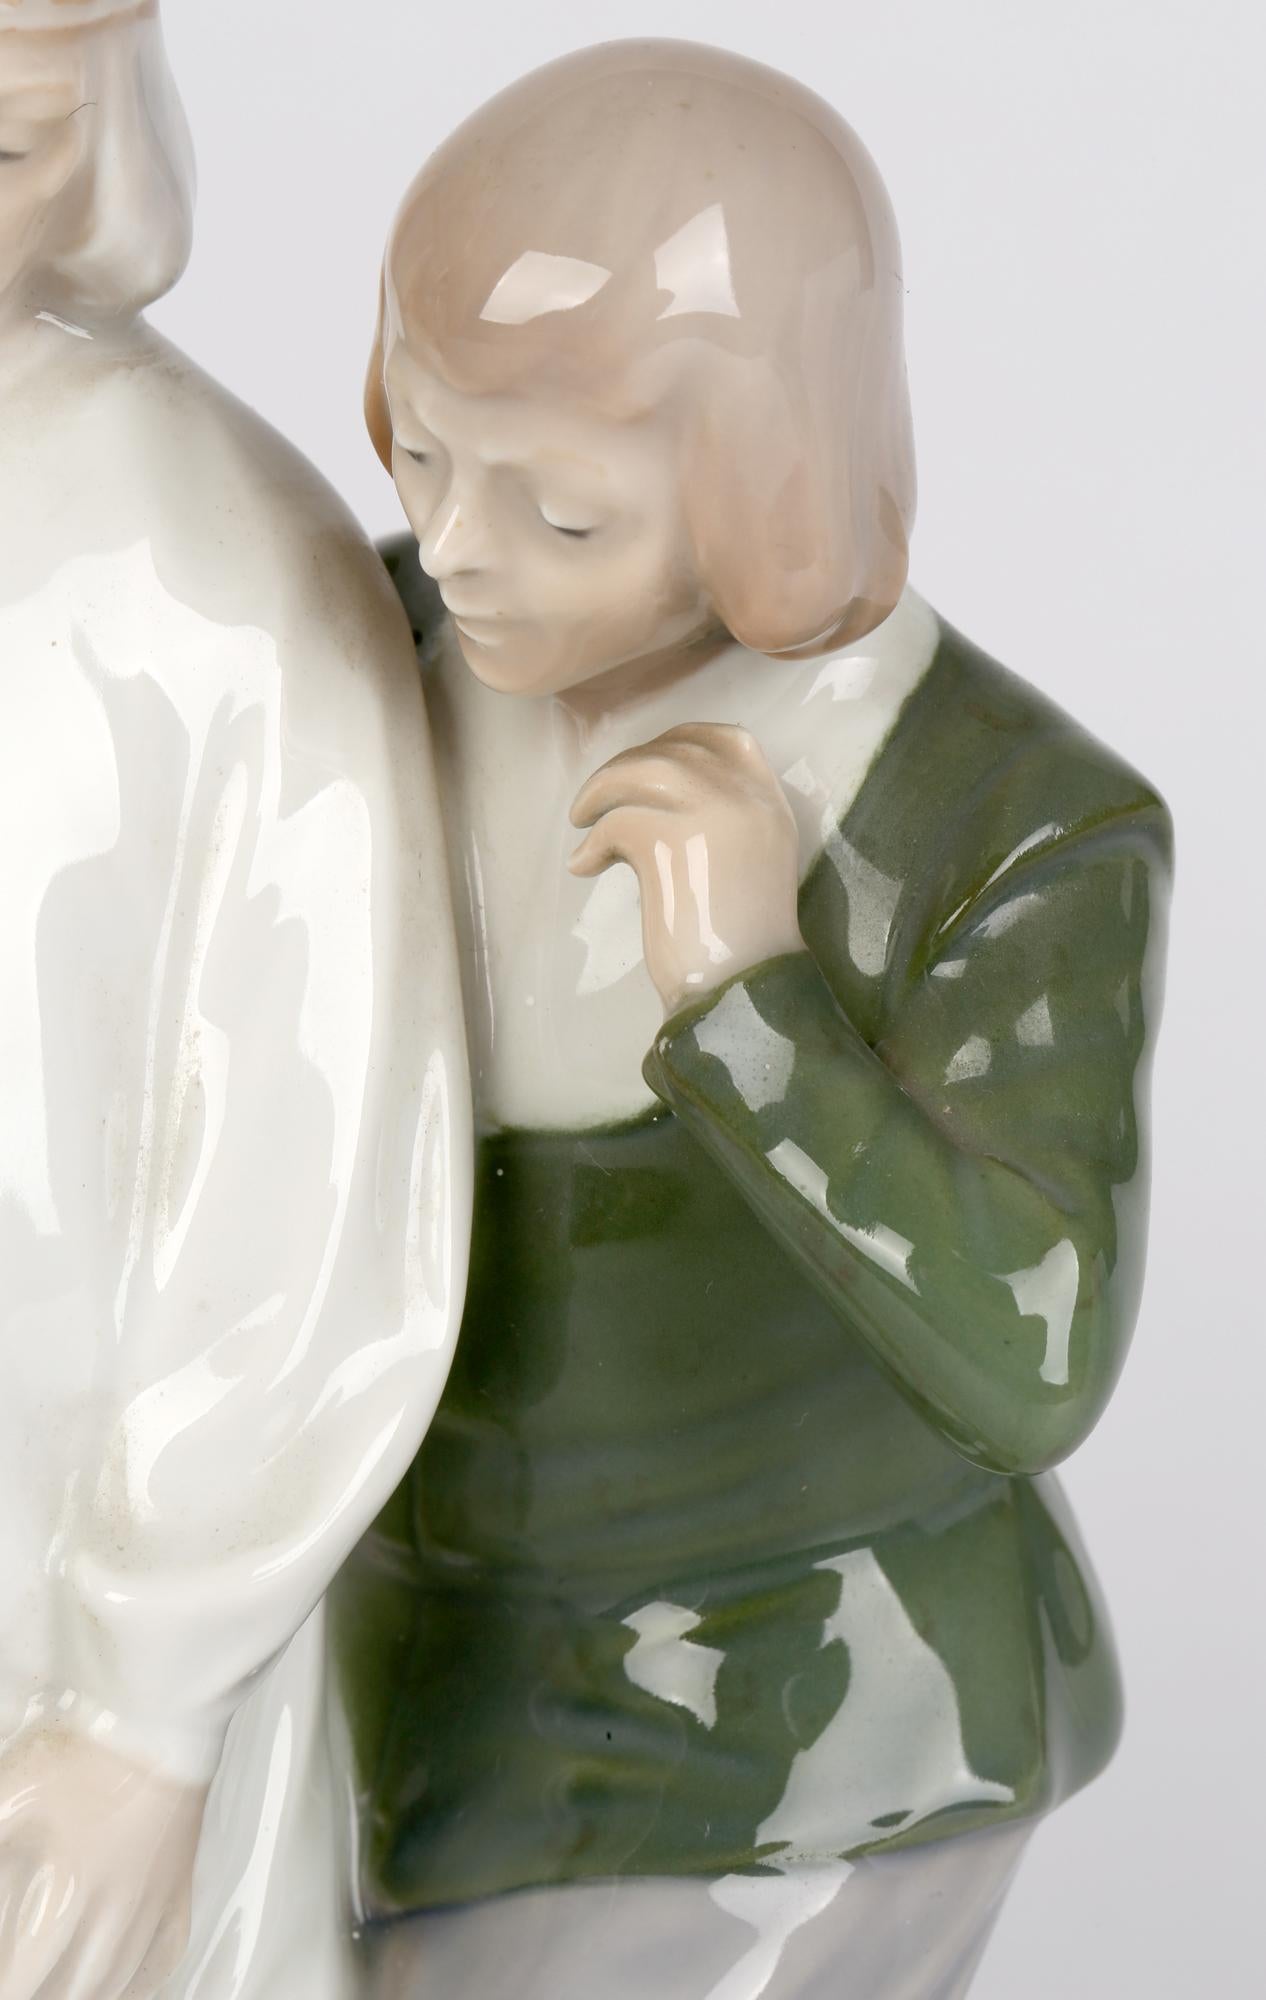 A scarce Danish Royal Copenhagen porcelain figure titled The Emperors New Clothes designed by Christian Thomsen (1860-1921) and dating between 1975-1979. The figure stands raised on a rectangular base and portrays the emperor standing wearing a